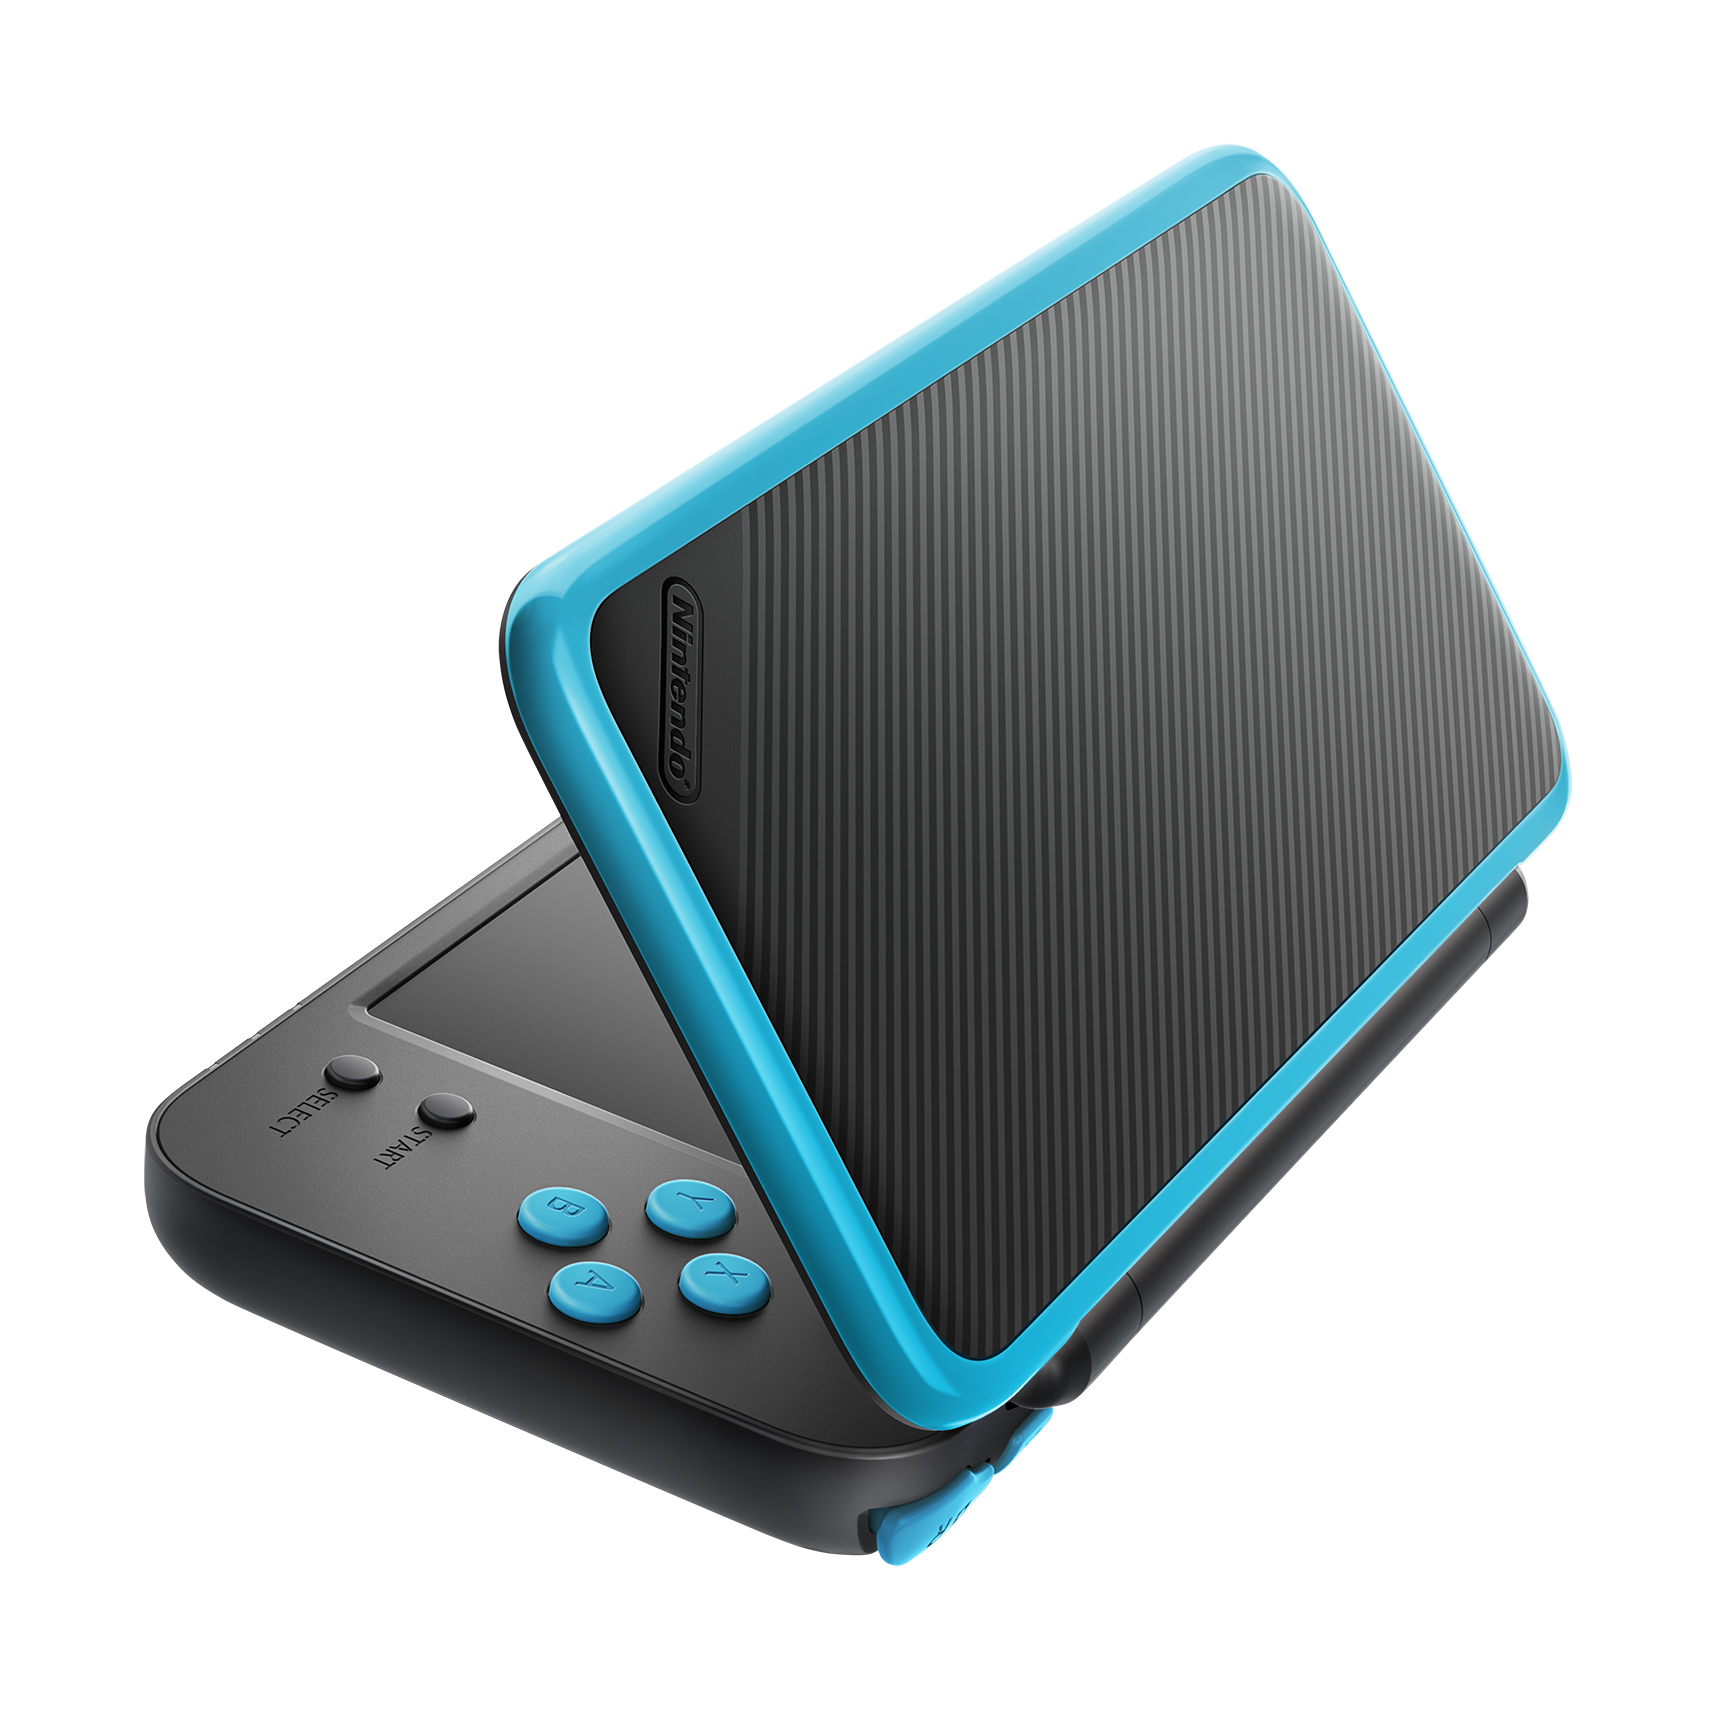 New Nintendo 2DS XL System w/ Mario Kart 7 Pre-installed, Black & Turquoise - image 4 of 6